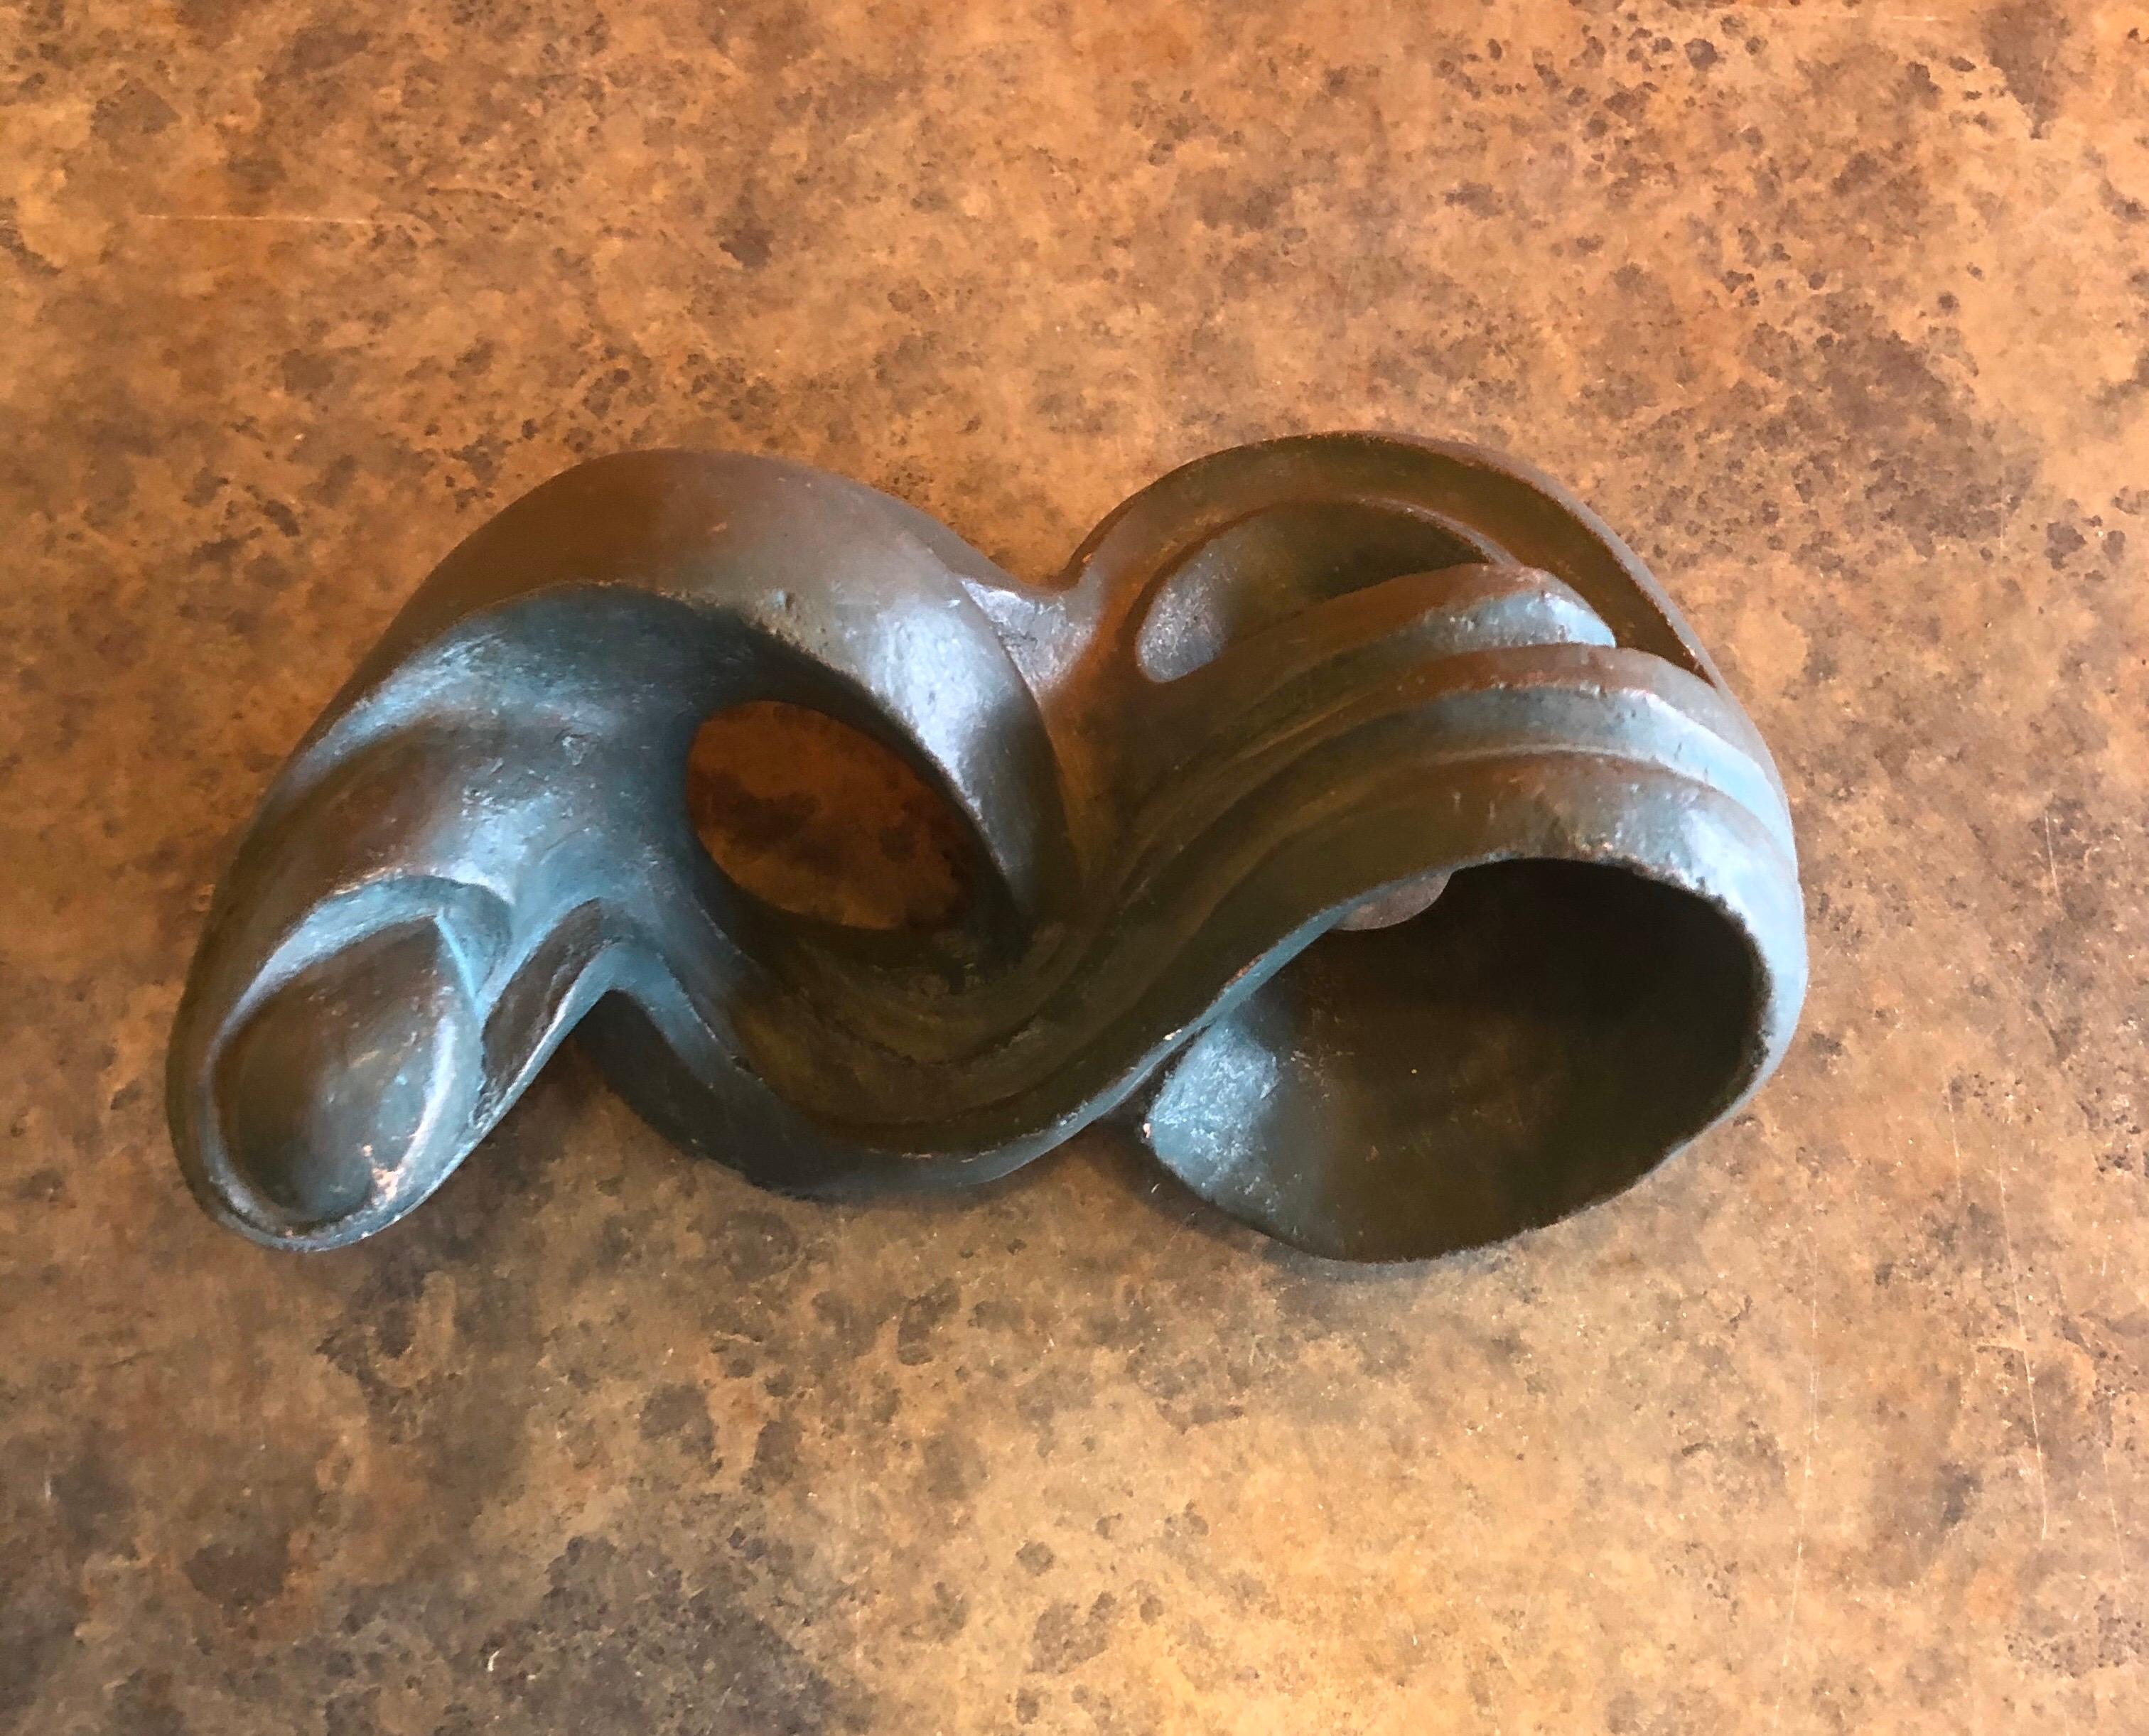 A very cool biomorphic abstact pottery sculpture by California listed artist Robert Ortlieb, circa 1970s. The piece is hand thrown terracotta pottery painted in with a flat light green paint.